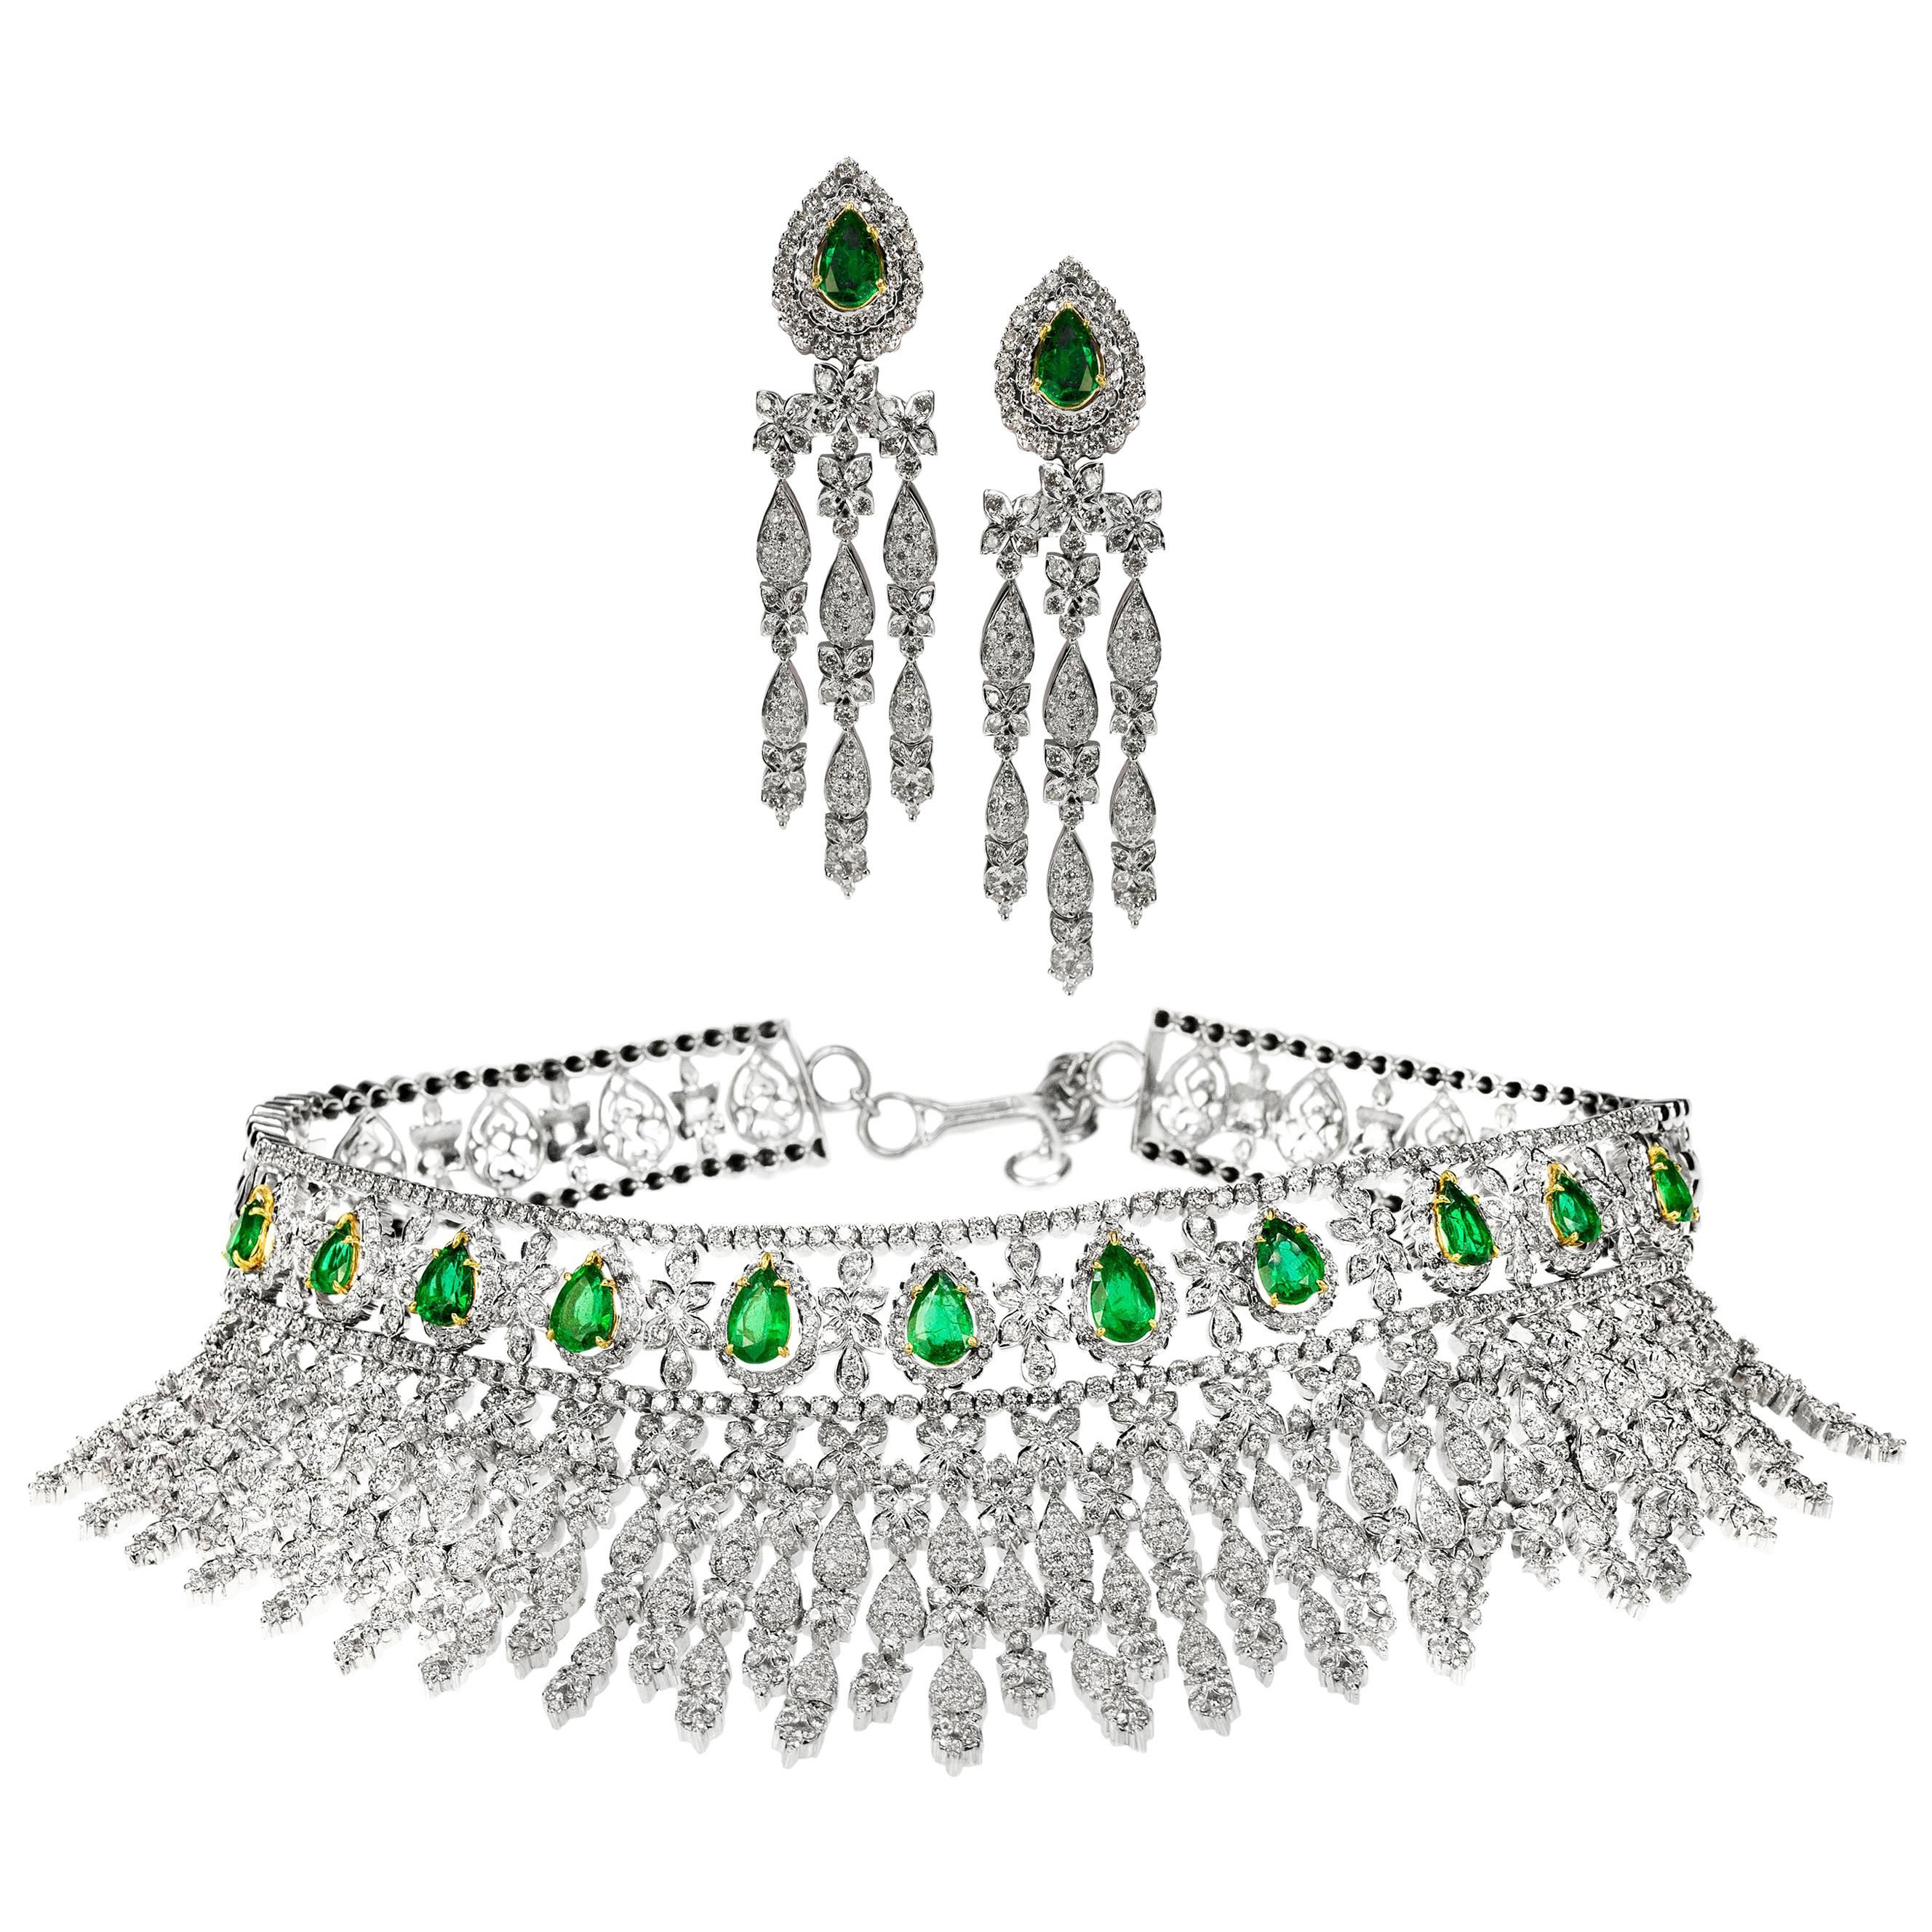 Magnificent Emerald and Diamond Necklace and Earring Suite in 18 Karat Gold